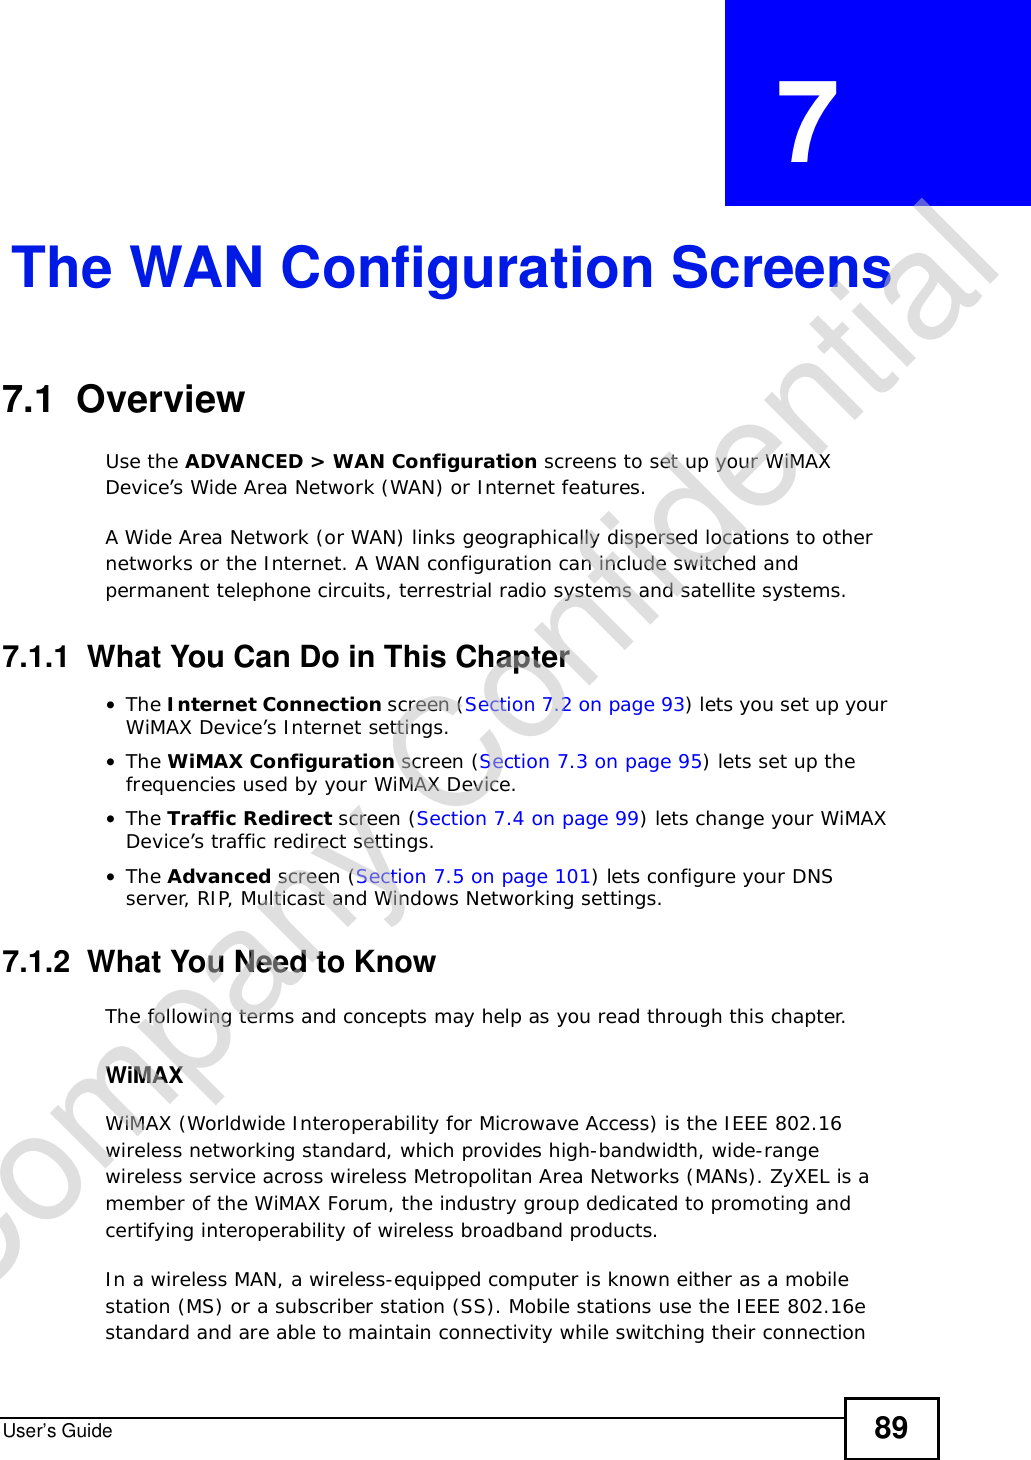 User’s Guide 89CHAPTER  7 The WAN Configuration Screens7.1  Overview Use the ADVANCED &gt; WAN Configuration screens to set up your WiMAX Device’s Wide Area Network (WAN) or Internet features.A Wide Area Network (or WAN) links geographically dispersed locations to other networks or the Internet. A WAN configuration can include switched and permanent telephone circuits, terrestrial radio systems and satellite systems.7.1.1  What You Can Do in This Chapter•The Internet Connection screen (Section 7.2 on page 93) lets you set up your WiMAX Device’s Internet settings.•The WiMAX Configuration screen (Section 7.3 on page 95) lets set up the frequencies used by your WiMAX Device.•The Traffic Redirect screen (Section 7.4 on page 99) lets change your WiMAX Device’s traffic redirect settings.•The Advanced screen (Section 7.5 on page 101) lets configure your DNS server, RIP, Multicast and Windows Networking settings.7.1.2  What You Need to KnowThe following terms and concepts may help as you read through this chapter.WiMAX WiMAX (Worldwide Interoperability for Microwave Access) is the IEEE 802.16 wireless networking standard, which provides high-bandwidth, wide-range wireless service across wireless Metropolitan Area Networks (MANs). ZyXEL is a member of the WiMAX Forum, the industry group dedicated to promoting and certifying interoperability of wireless broadband products.In a wireless MAN, a wireless-equipped computer is known either as a mobile station (MS) or a subscriber station (SS). Mobile stations use the IEEE 802.16e standard and are able to maintain connectivity while switching their connection Company Confidential